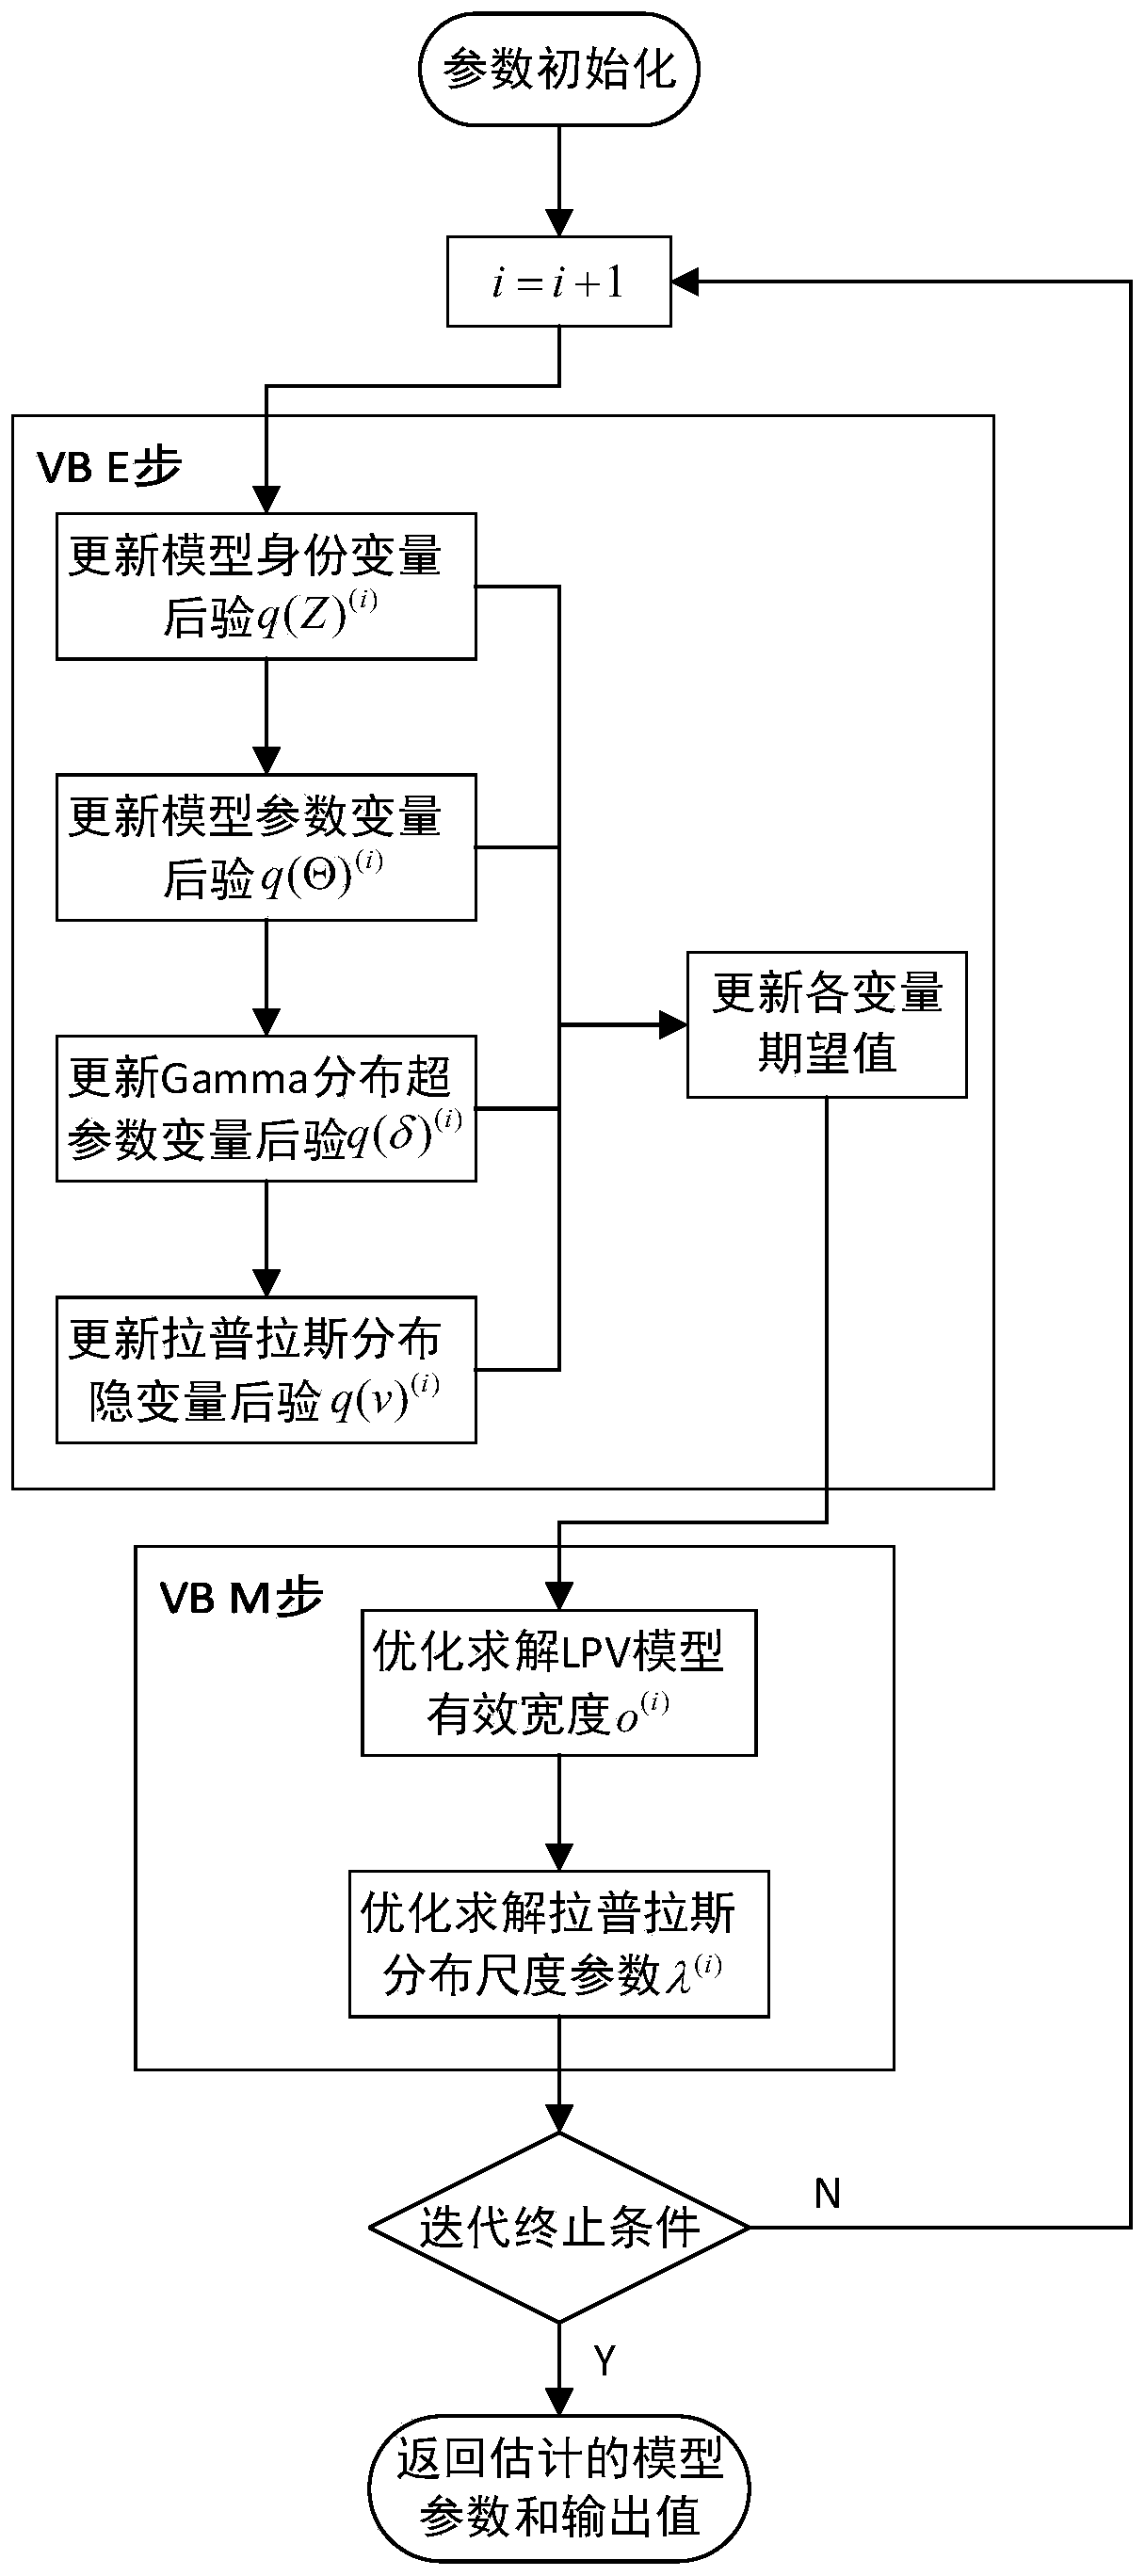 Nonlinear industrial process robust identification and output estimation method